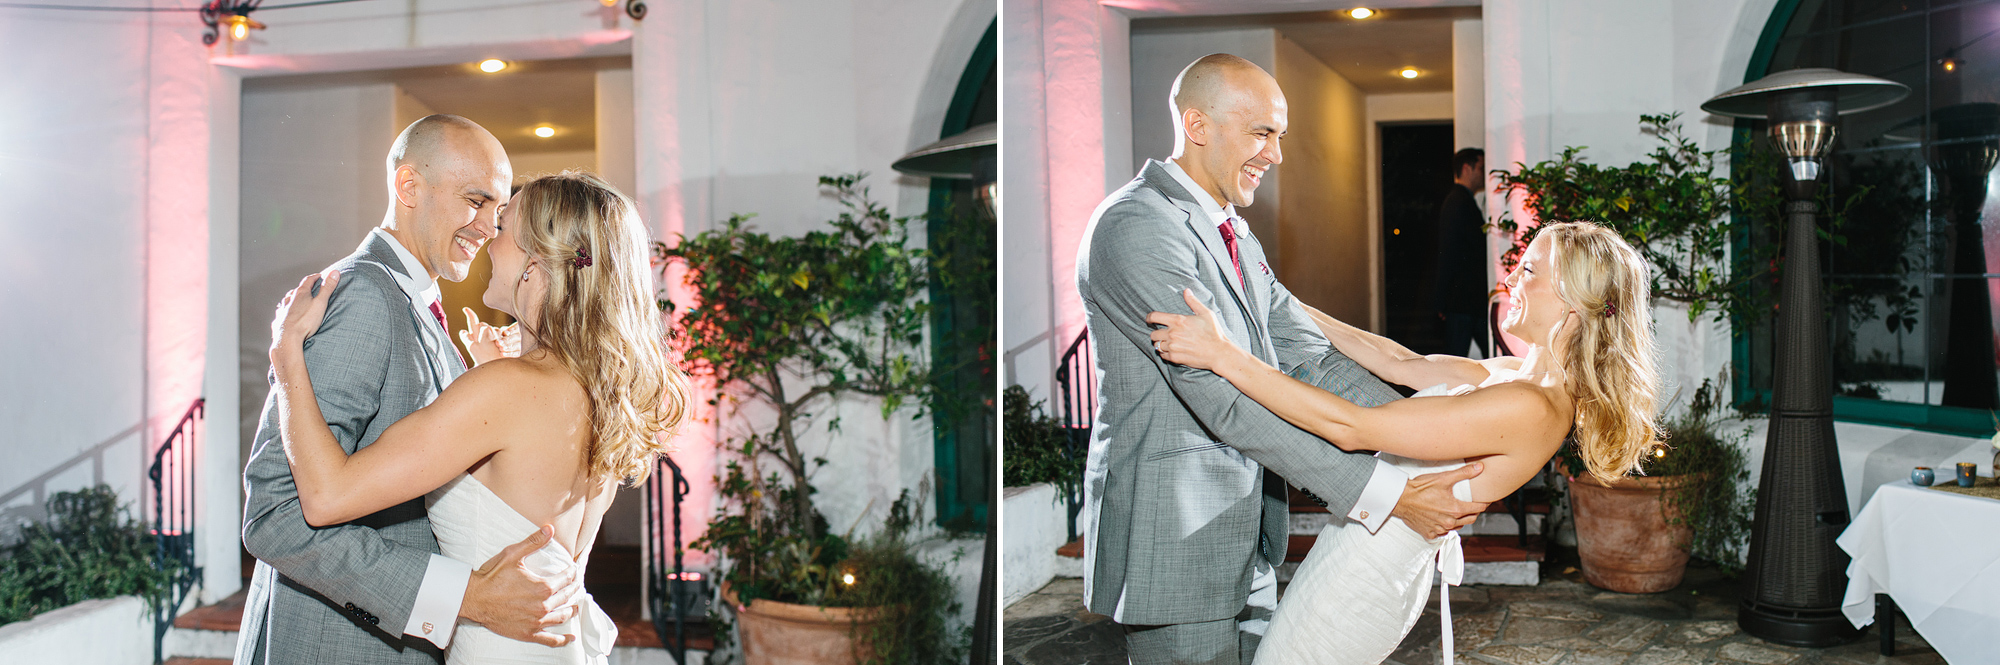 Adorable moments during the first dance. 